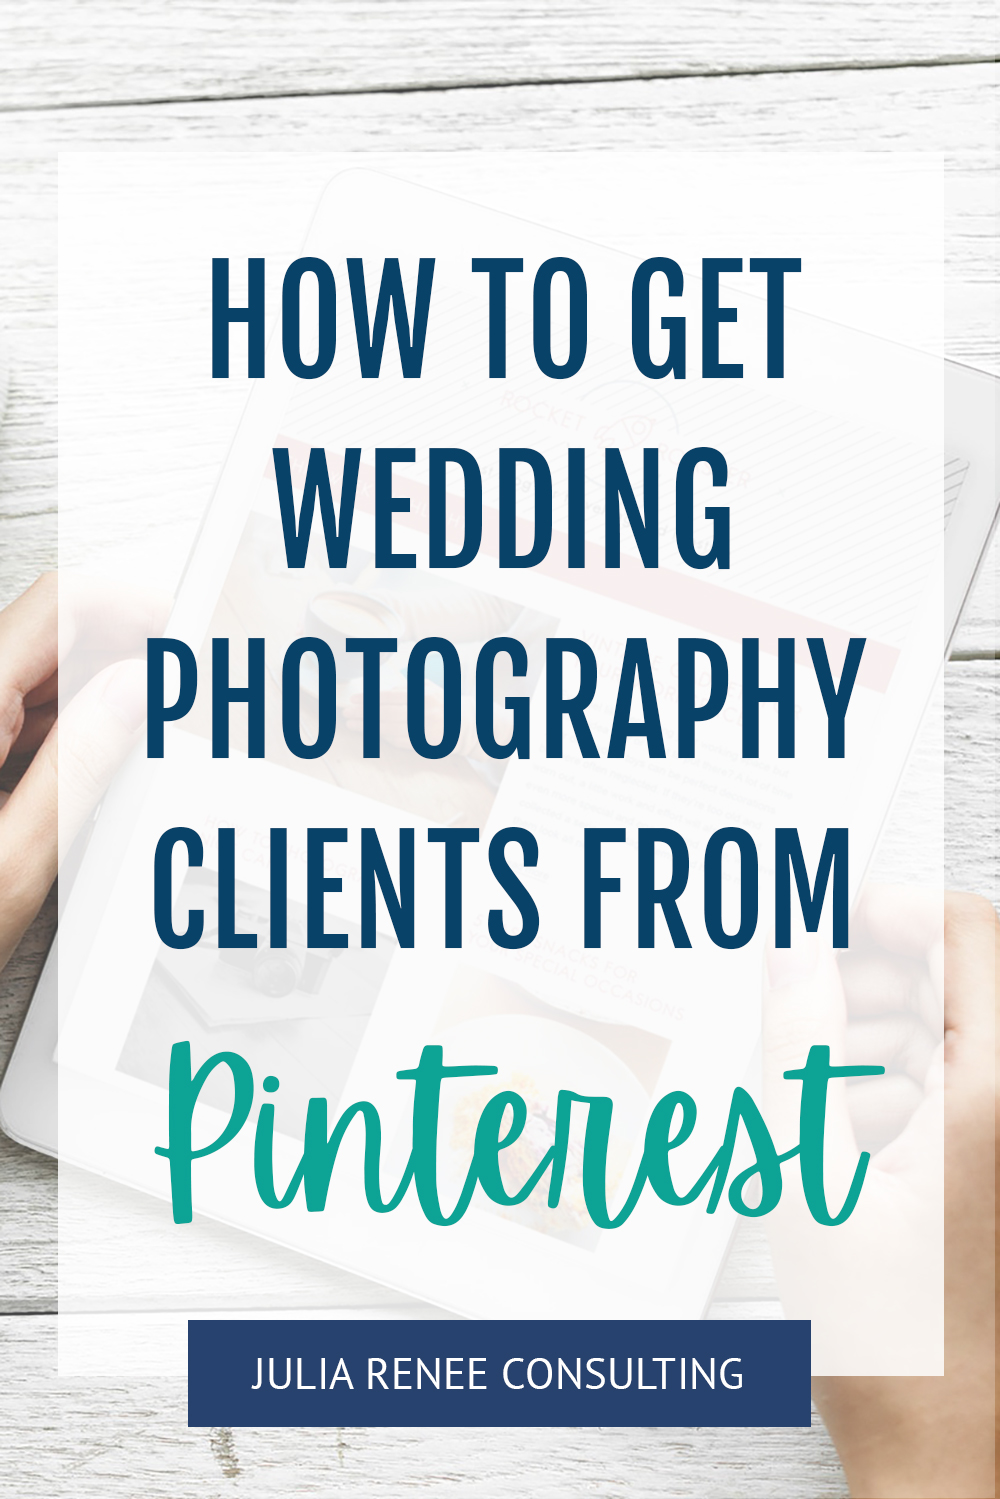 9 Pinterest Strategies for Wedding Photographers to Reach More Clients